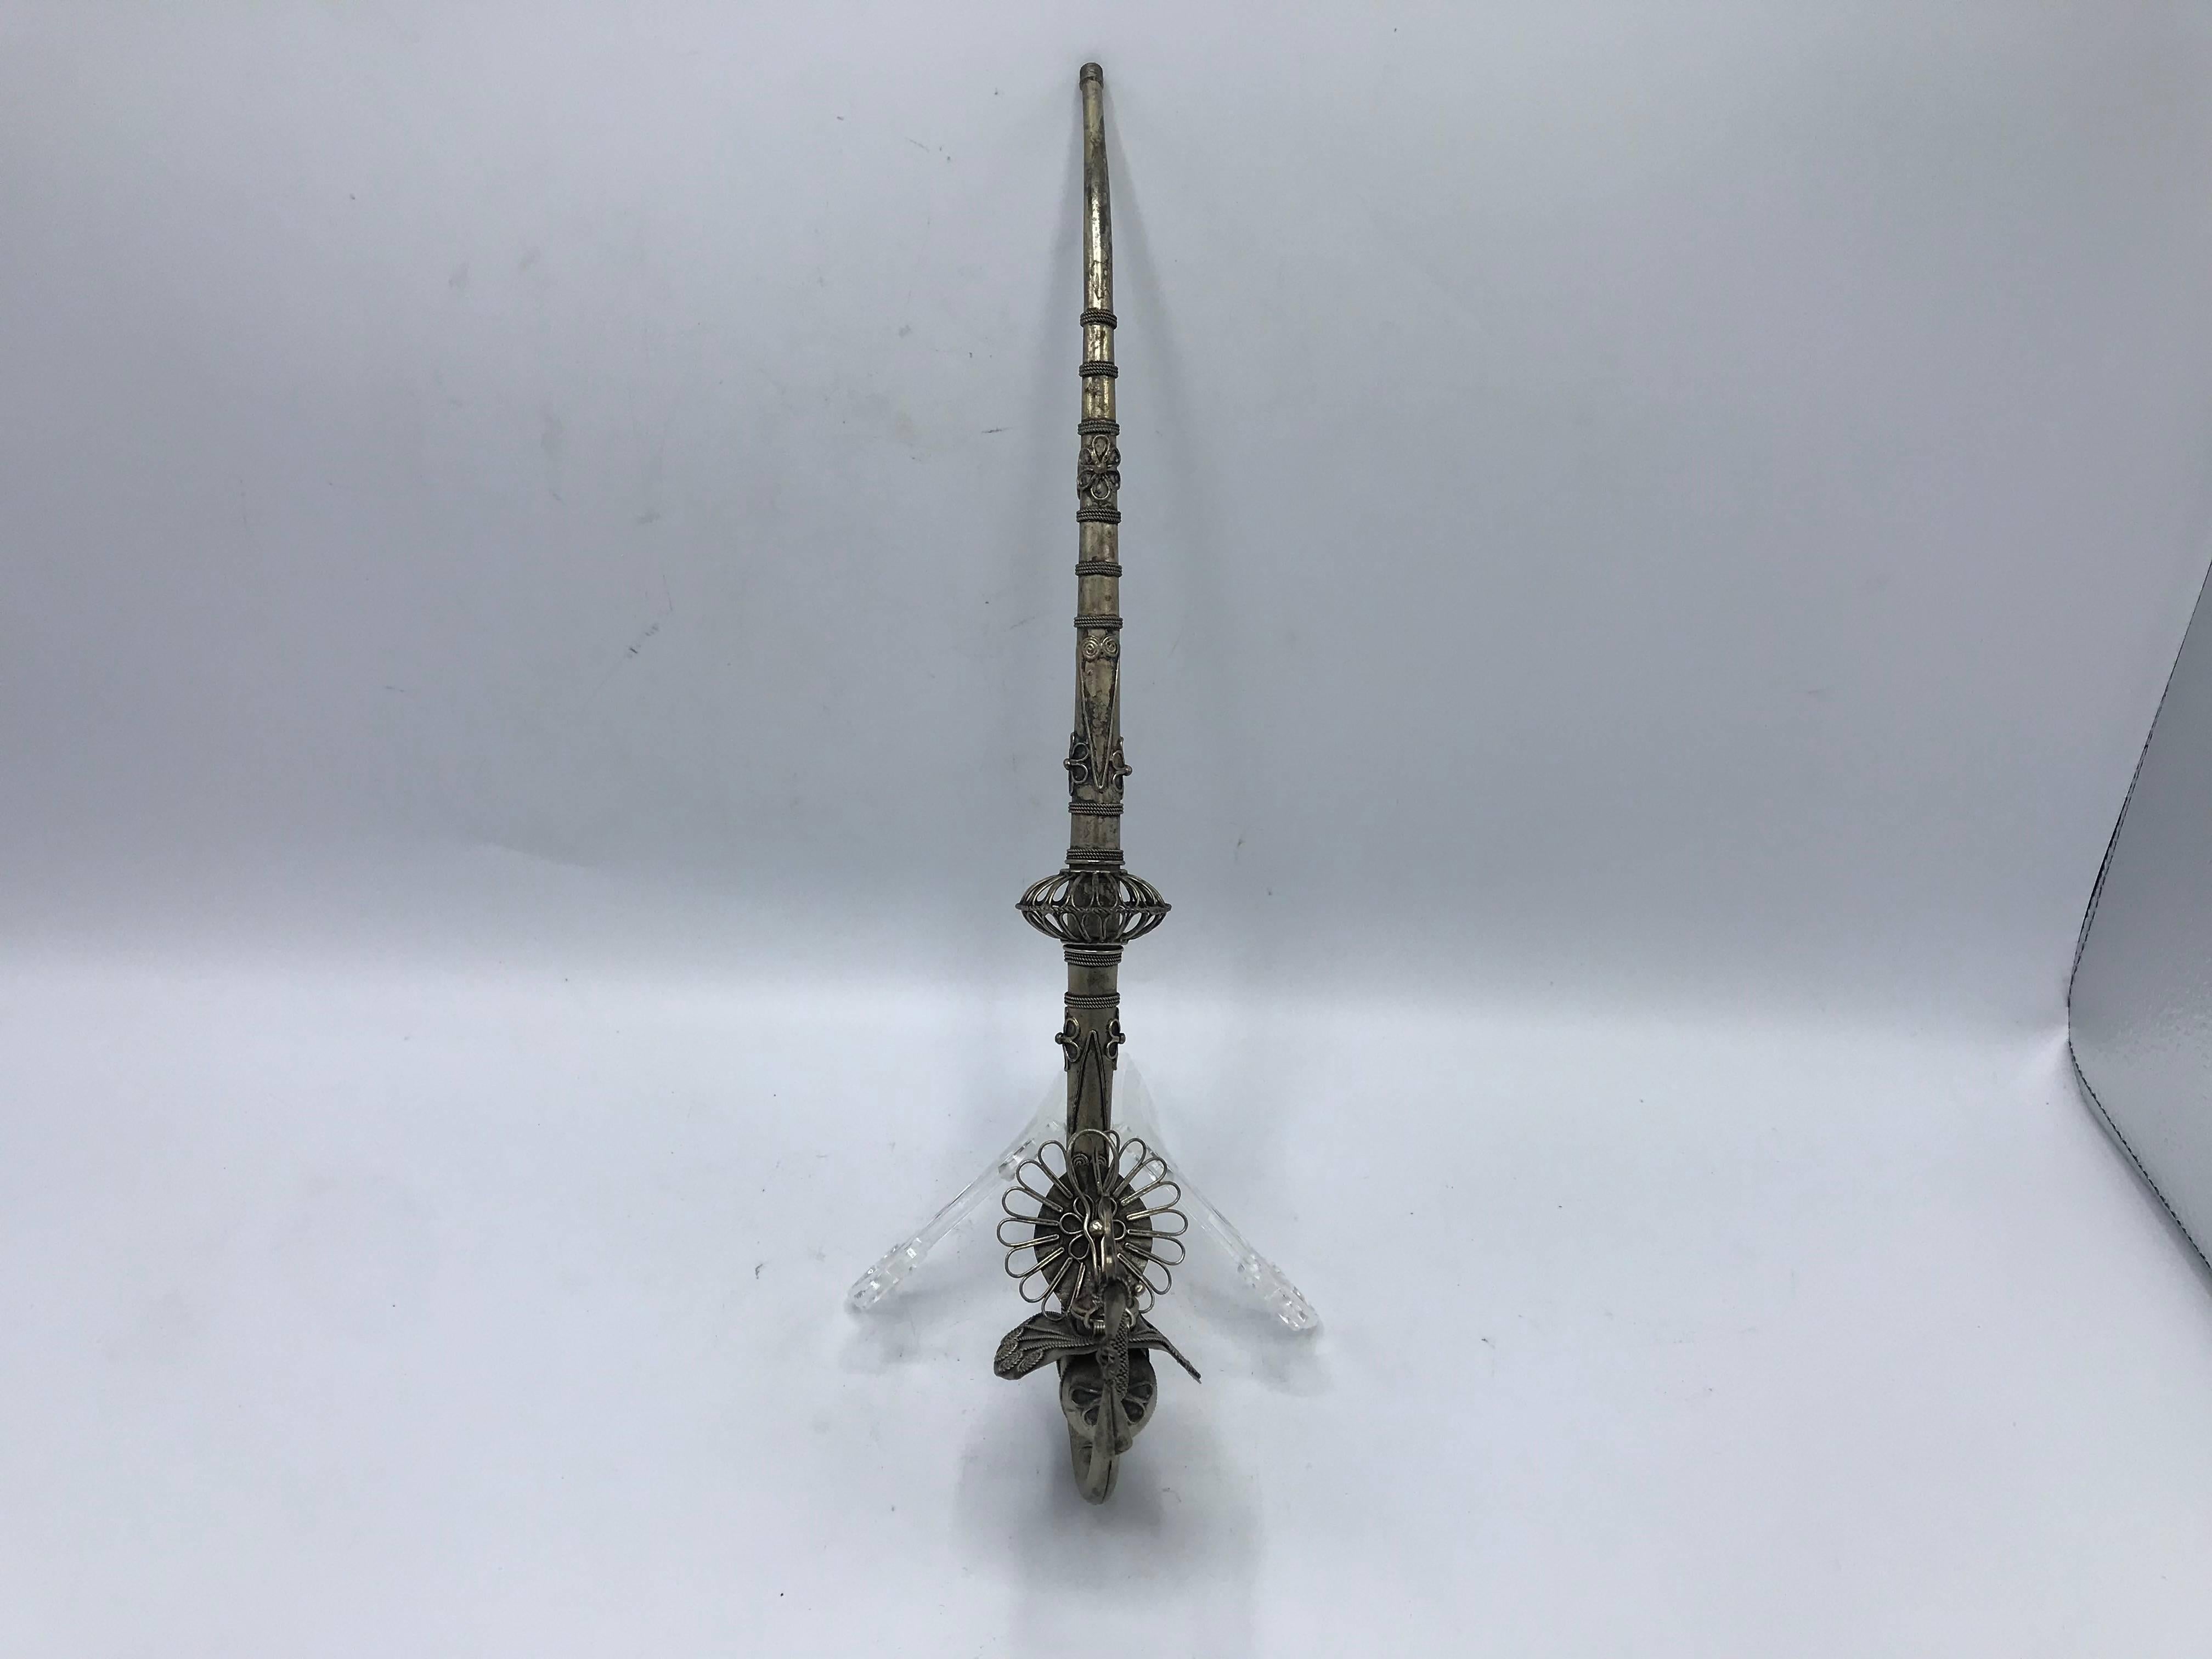 Offered is an exquisite, 19th century Chinese sterling silver opium pipe with a highly detailed 3.5